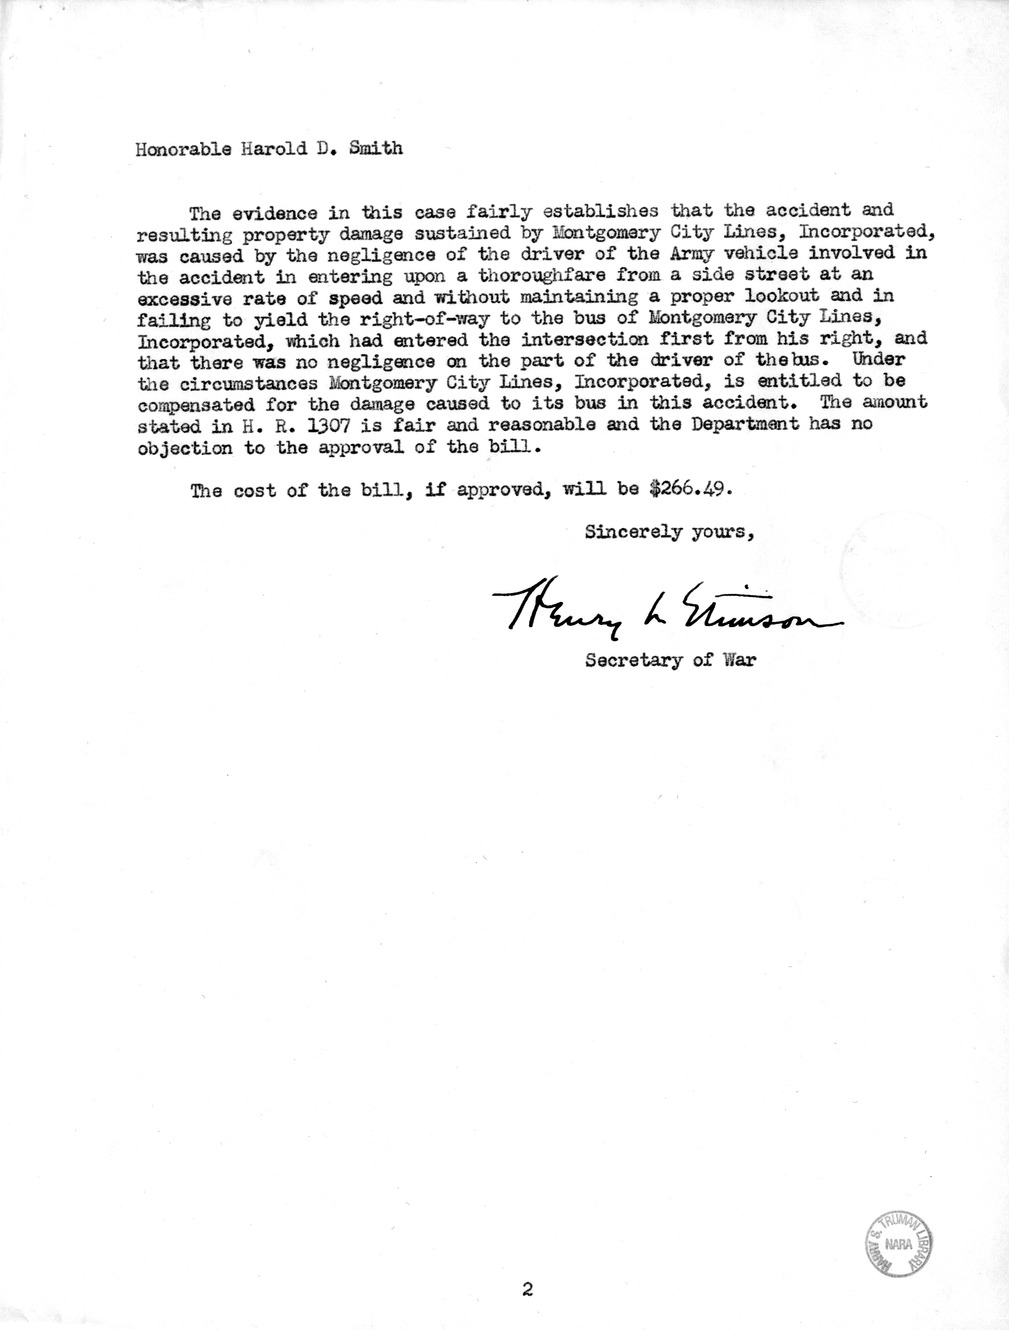 Memorandum from Frederick J. Bailey to M. C. Latta, H.R. 1307, For the Relief of Montgomery City Lines, Incorporated, with Attachments